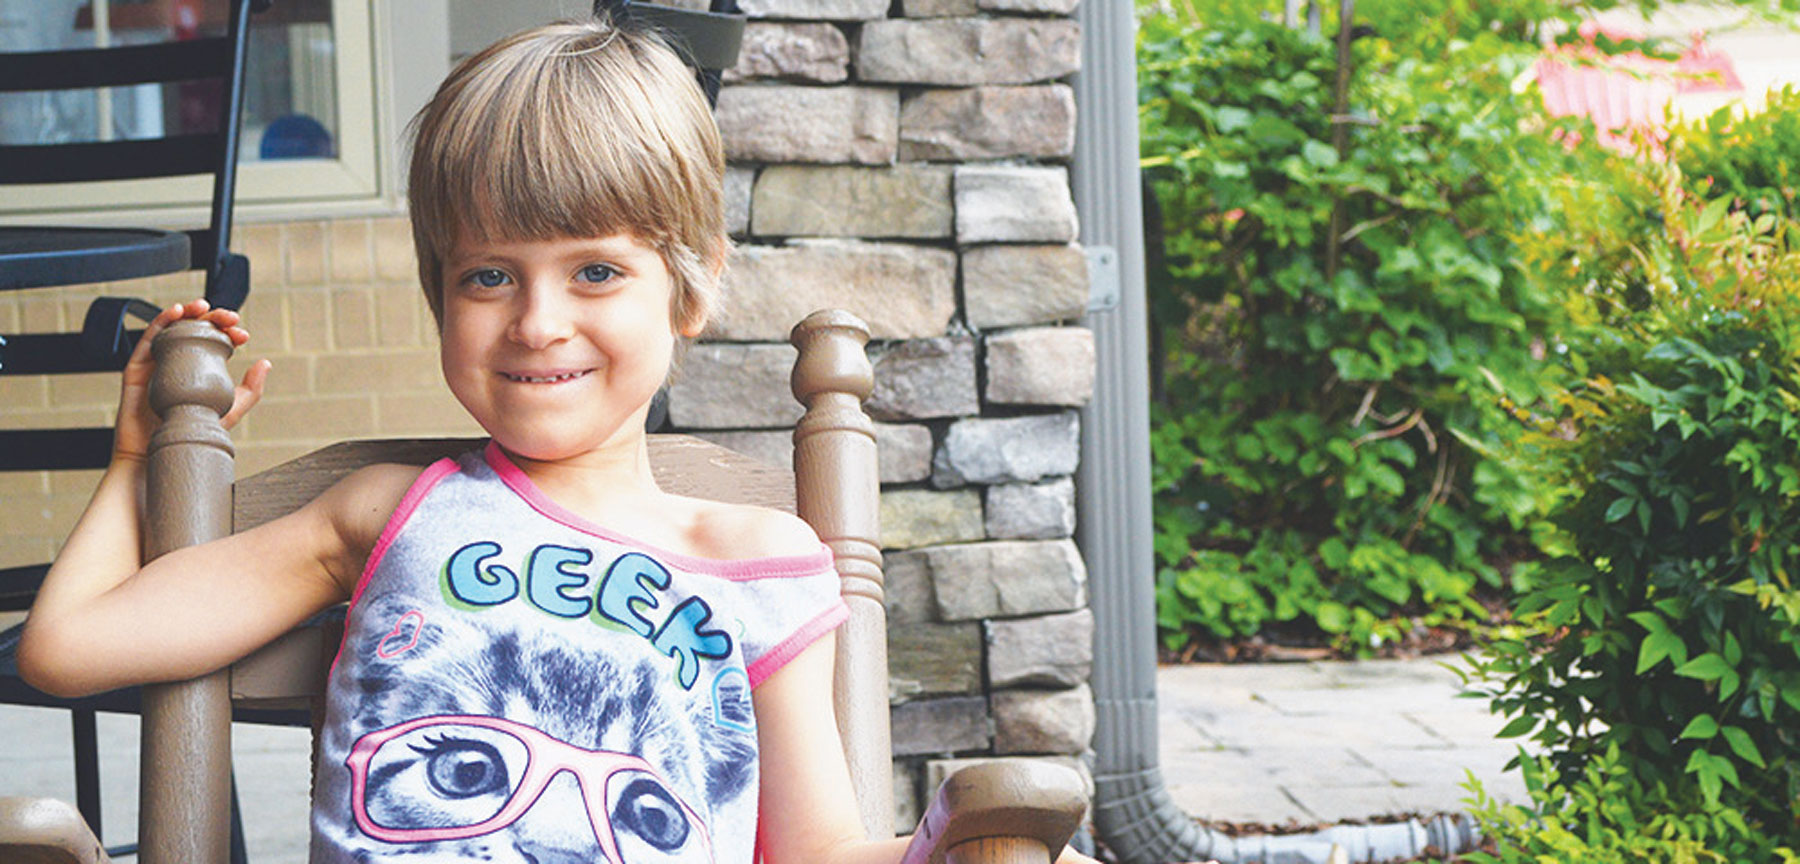 Local girl worldwide poster child for Ronald McDonald House